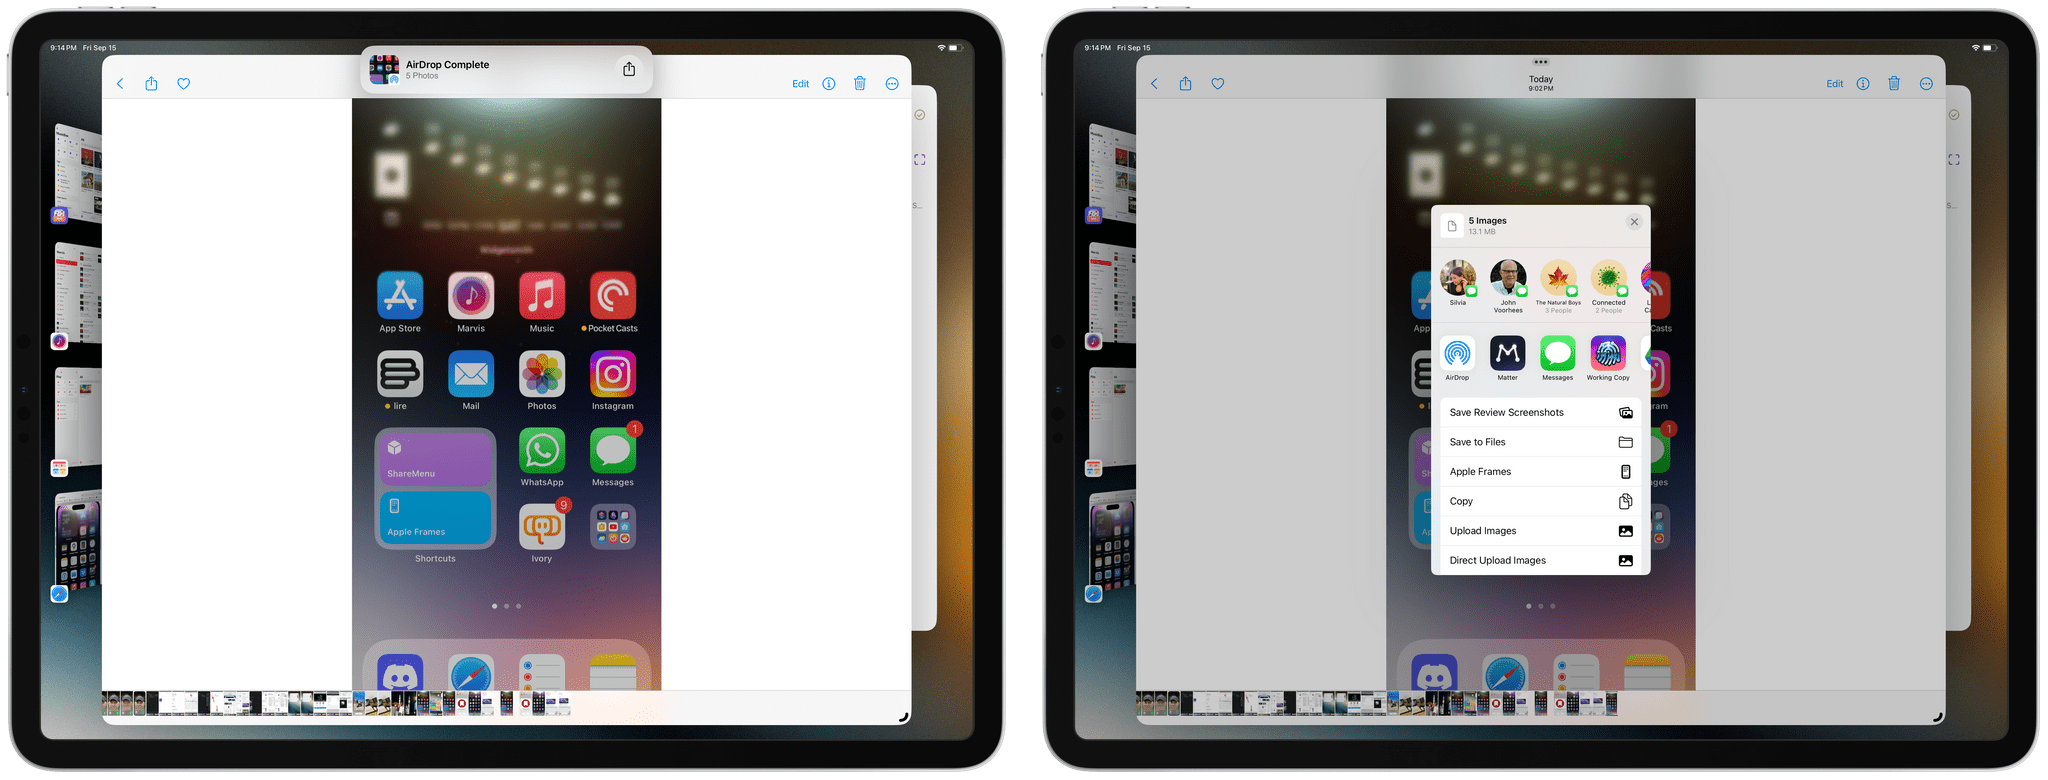 In another nice touch, the activity displayed when receiving photos via AirDrop contains a button to instantly share images with the share sheet.